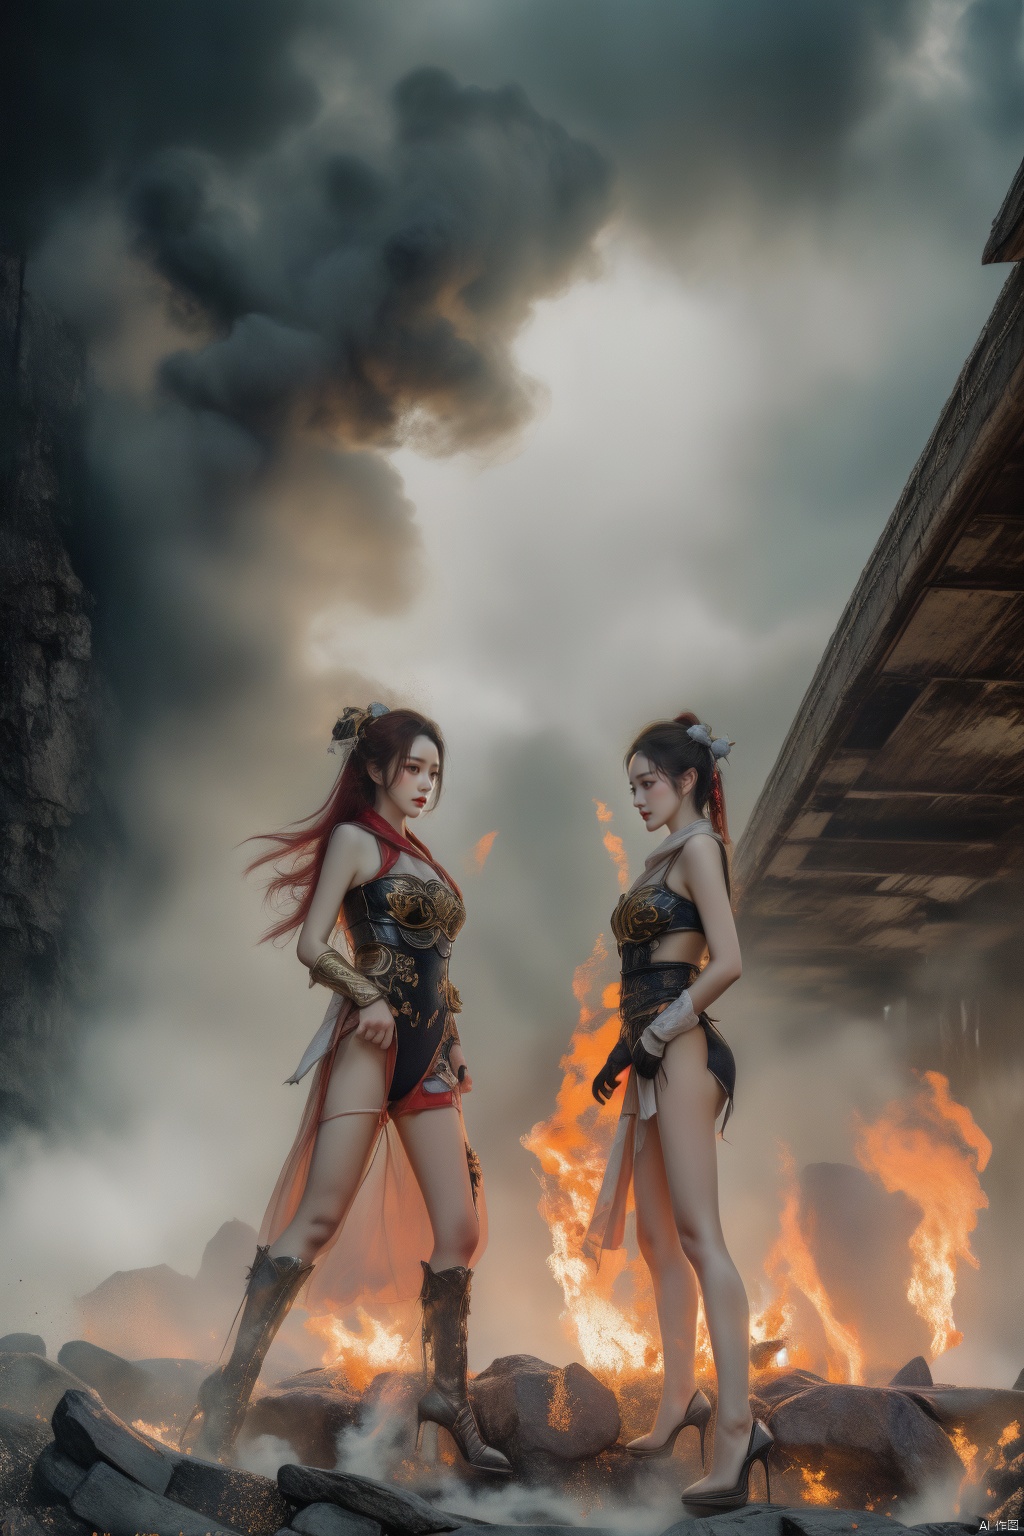  beauty,Toned figure,high_heels,high quality,best quality,(8k), , , , ,(2 girls fight), dachangtui,Colored eyes,white_body,girly_hair,red_hair,blue and white,golden and black,Tight gelcoat,Two-man struggle,Combat attitude,Bright environment,Sparks flew everywhere,Weapon collision, Super perspective, masterpiece,highly detailed CG illustration,wide shot